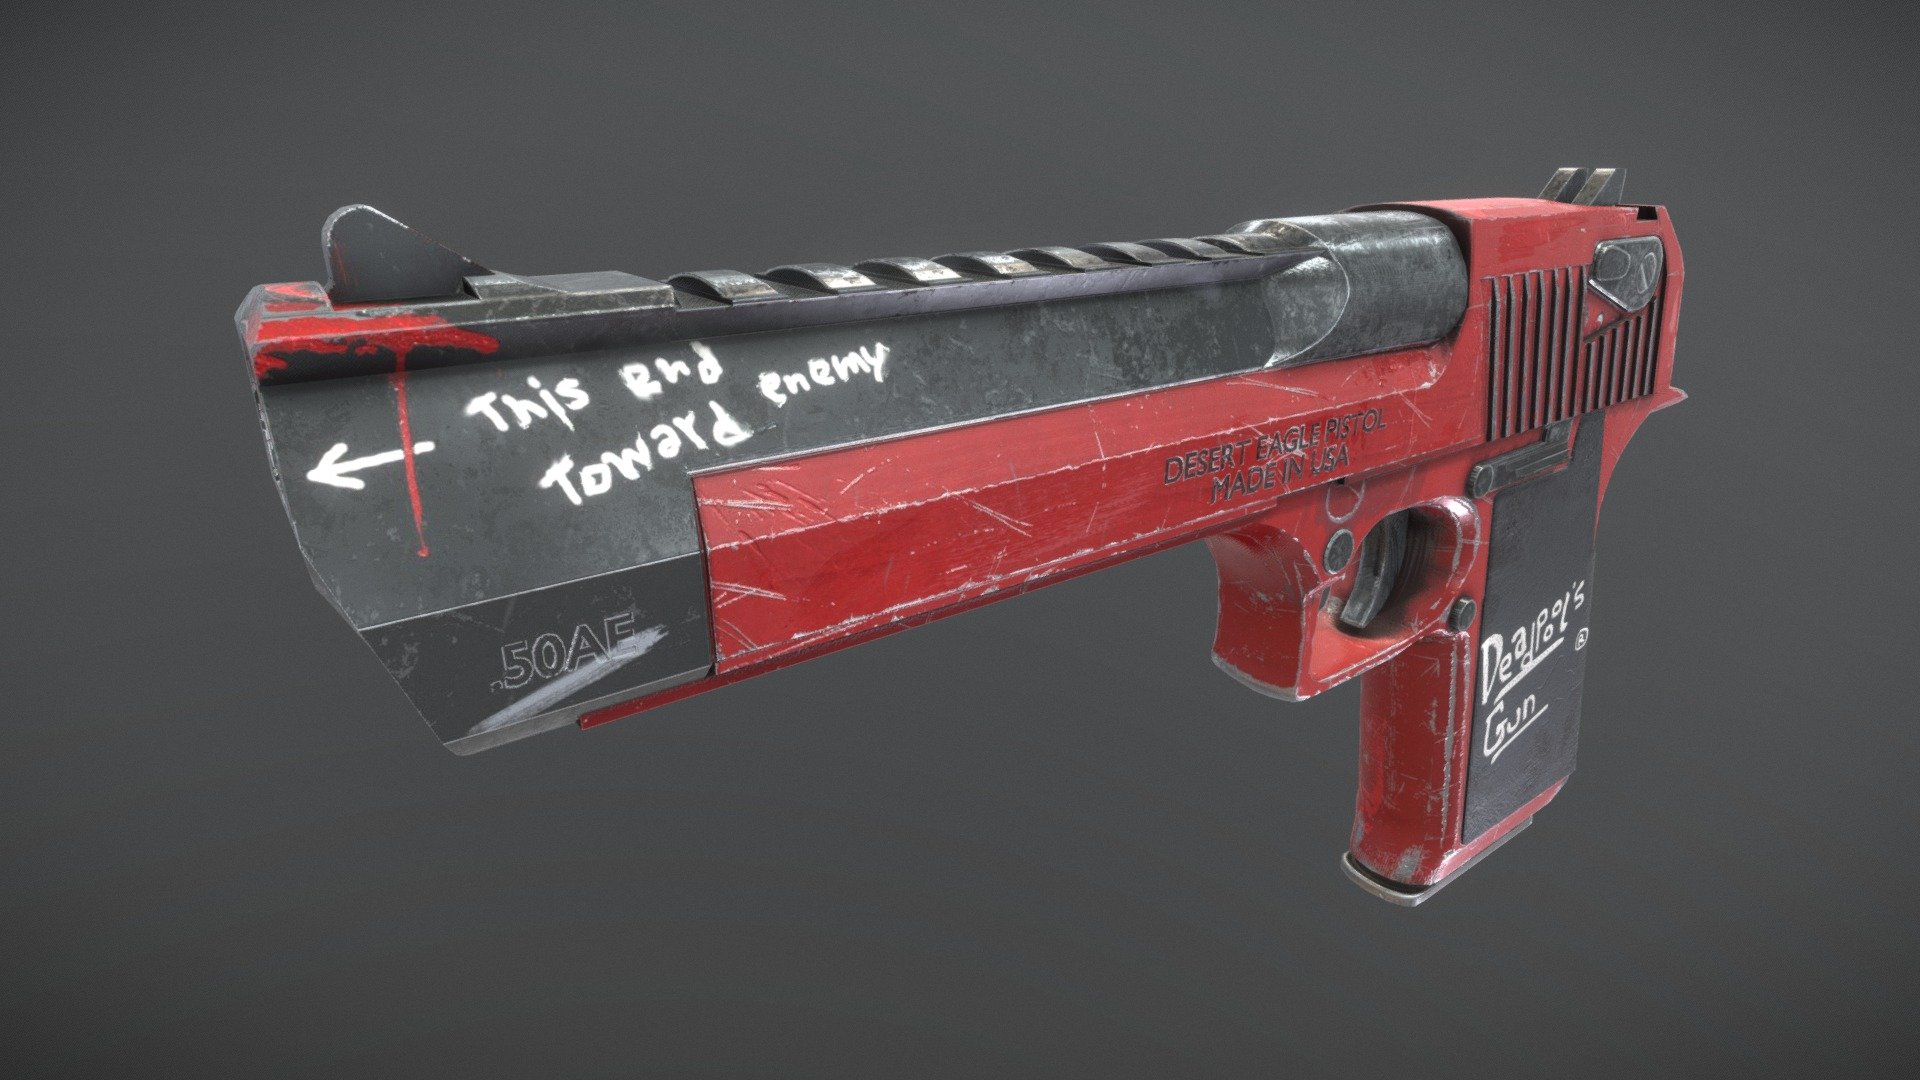 | Modelling by Tommy
| Texturing by cg_gregory
| Created by normal|studio

| normalfellows@gmail.com
| Good luck! - Deadpool's Desert Eagle! - 3D model by normal|studio (@Urmanga) 3d model